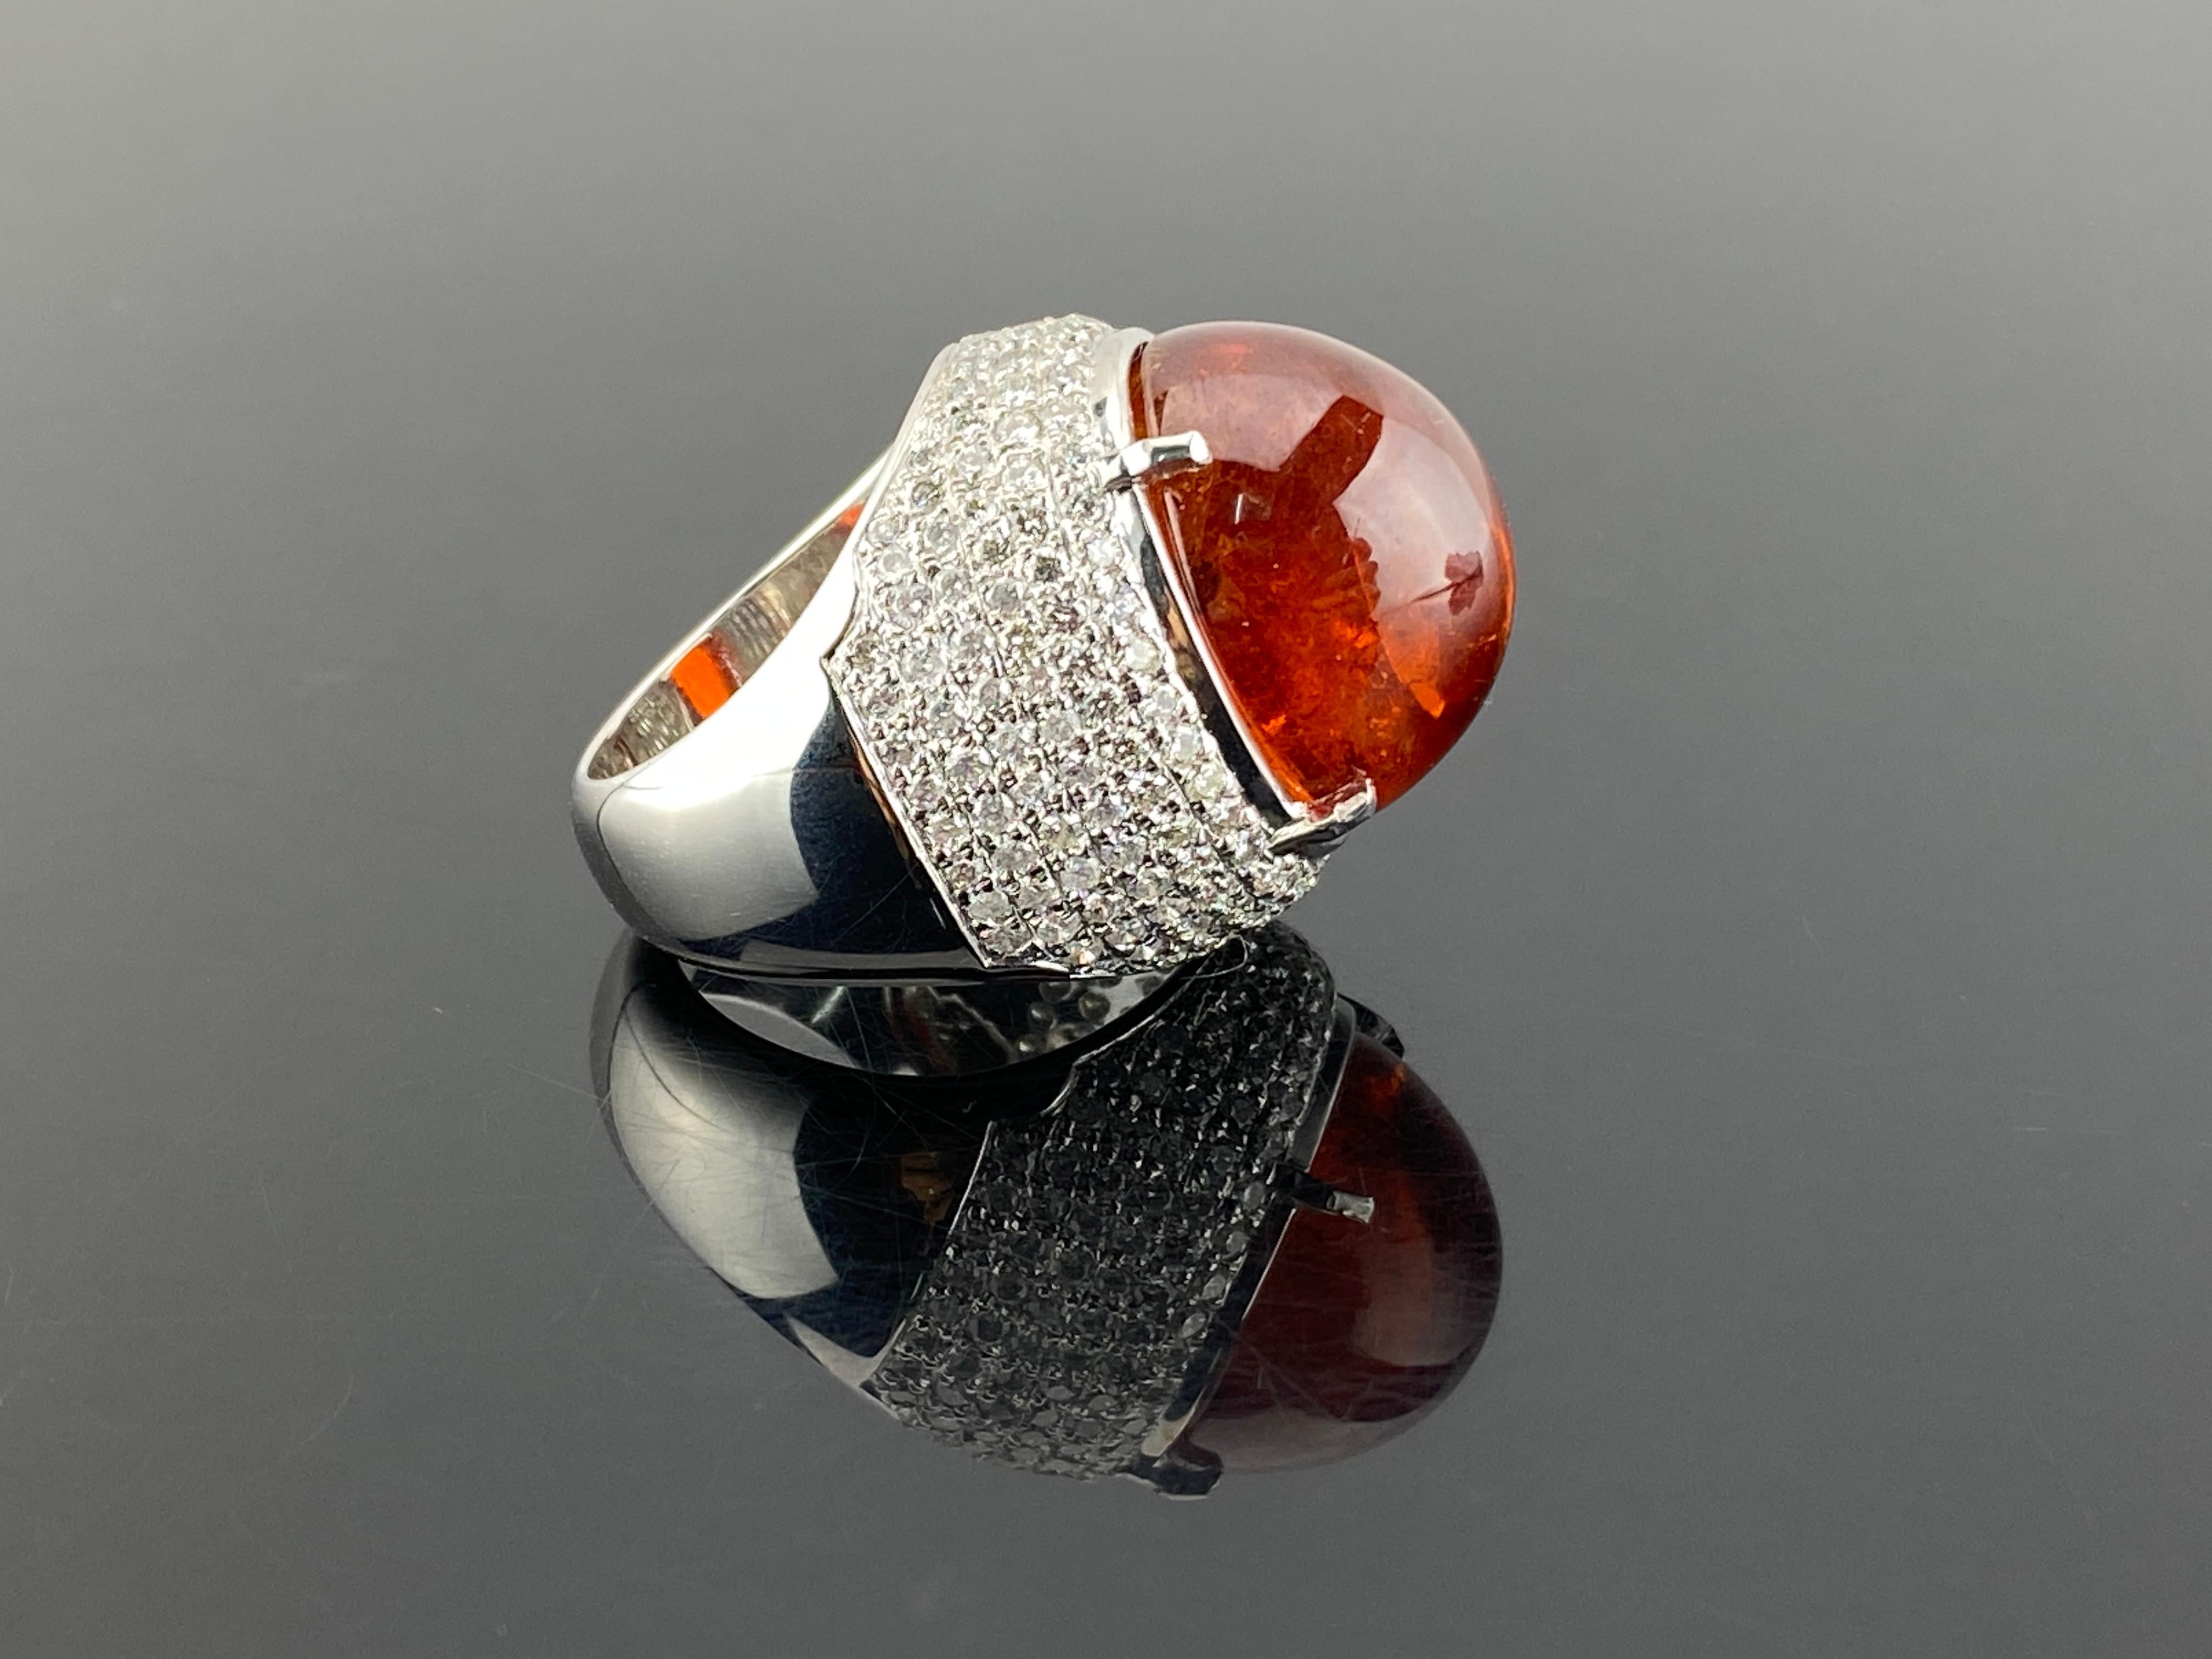 For a look that is regal and refined, look no further than this impressive 52.86 carat Mandarin Garnet cabochon ring. This spectacular gemstone is a statement of true luxury and exquisite taste. The color of a perfect Mandarin orange (hence its